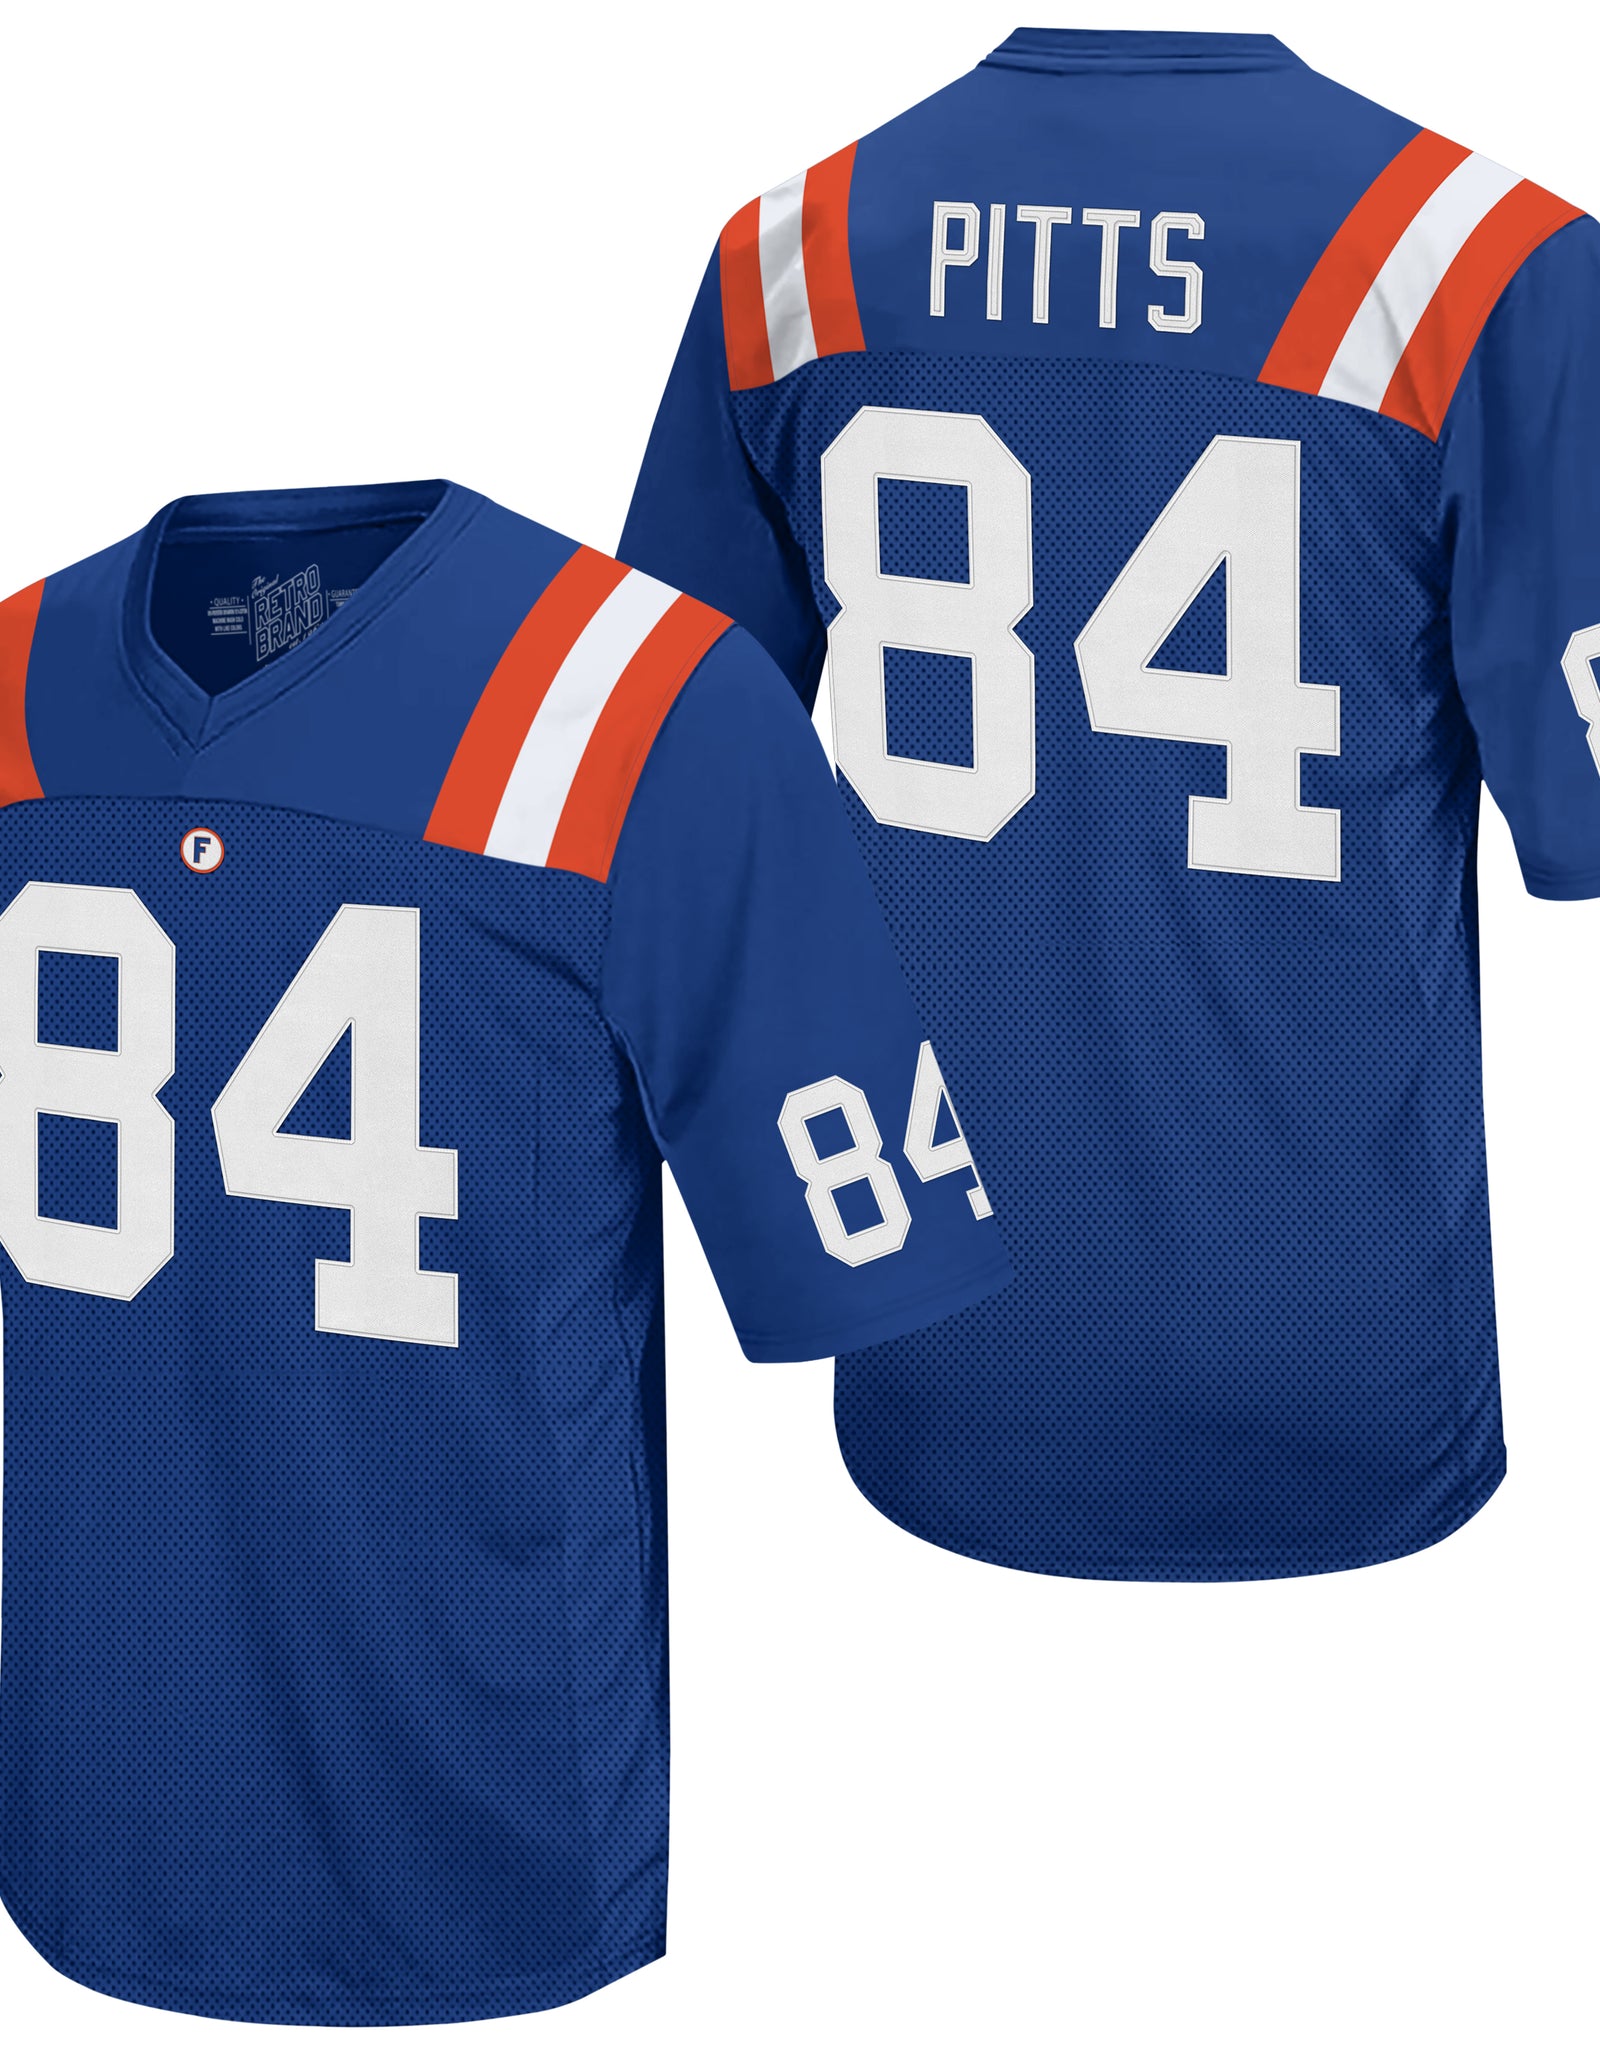 John Pitts home jersey